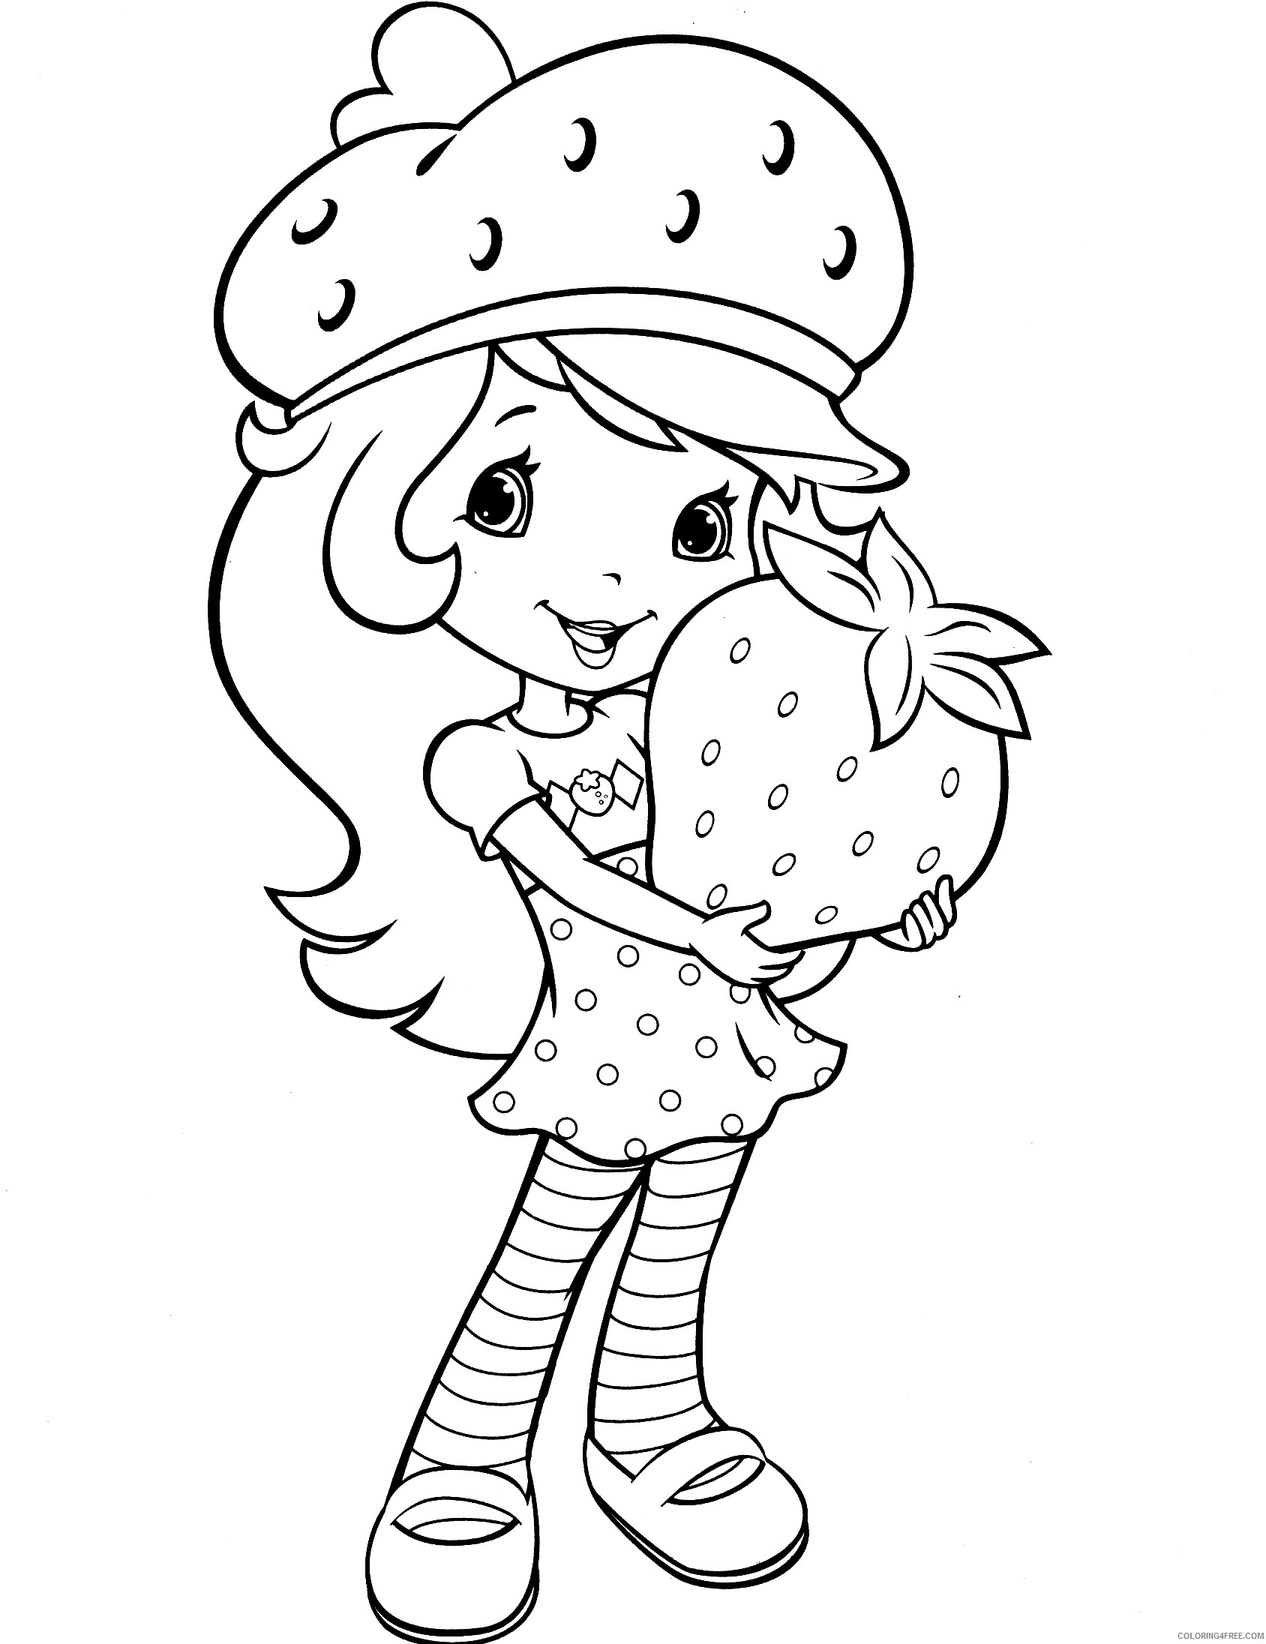 Strawberry Shortcake Cherry Jam Coloring Pages 1